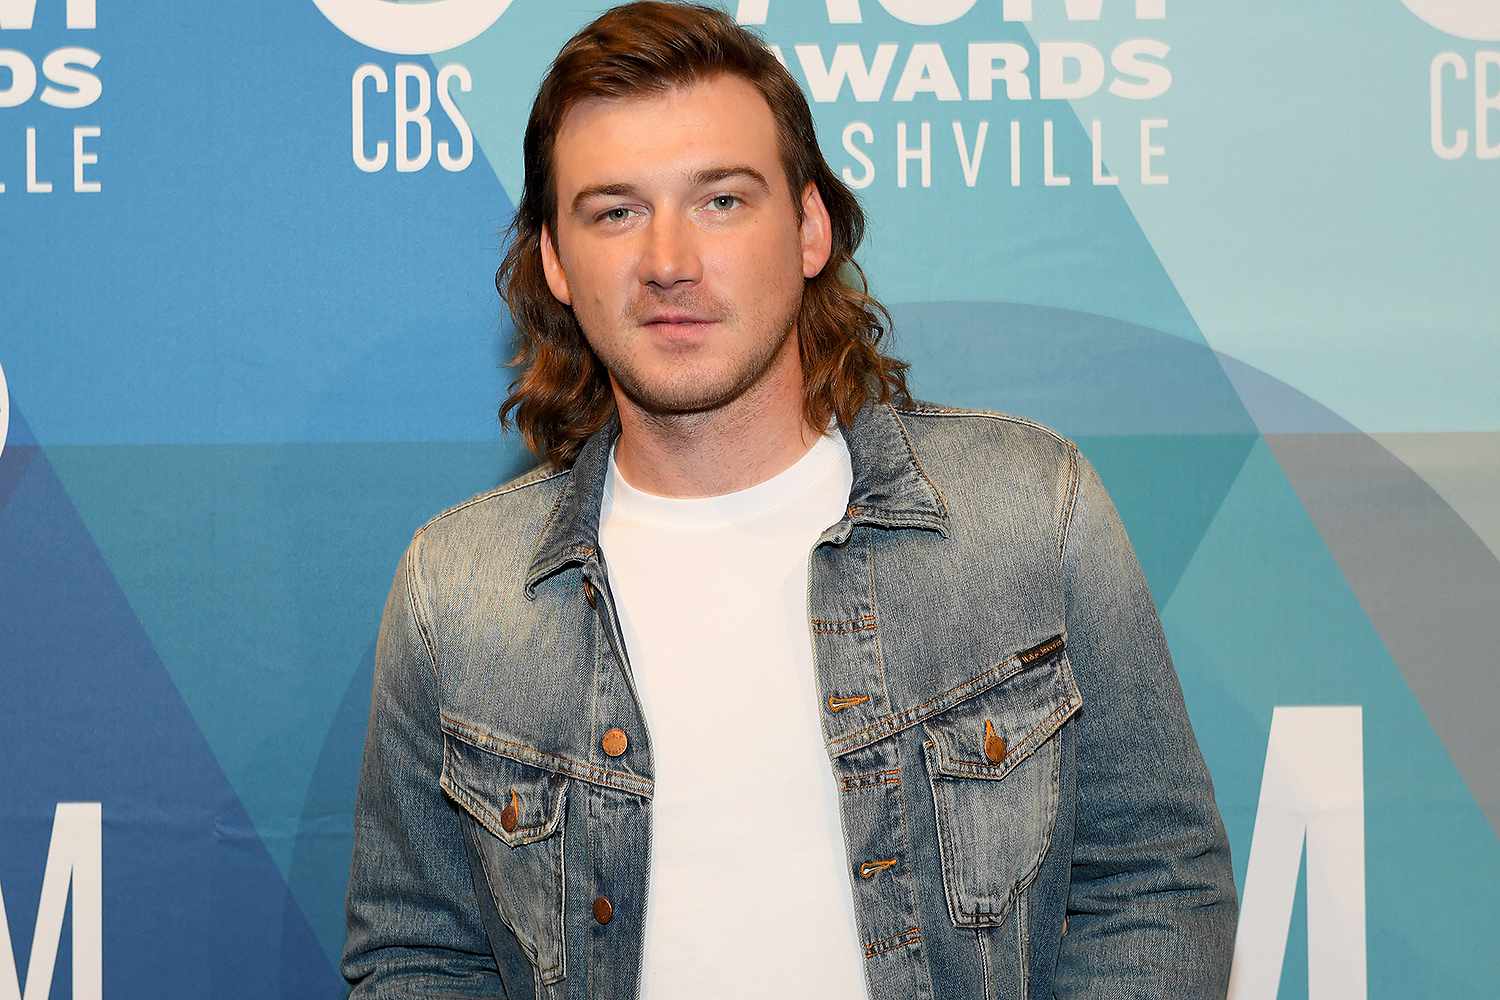 "From The Voice to Chart-Topping Hits: The Success Story of Morgan Wallen"